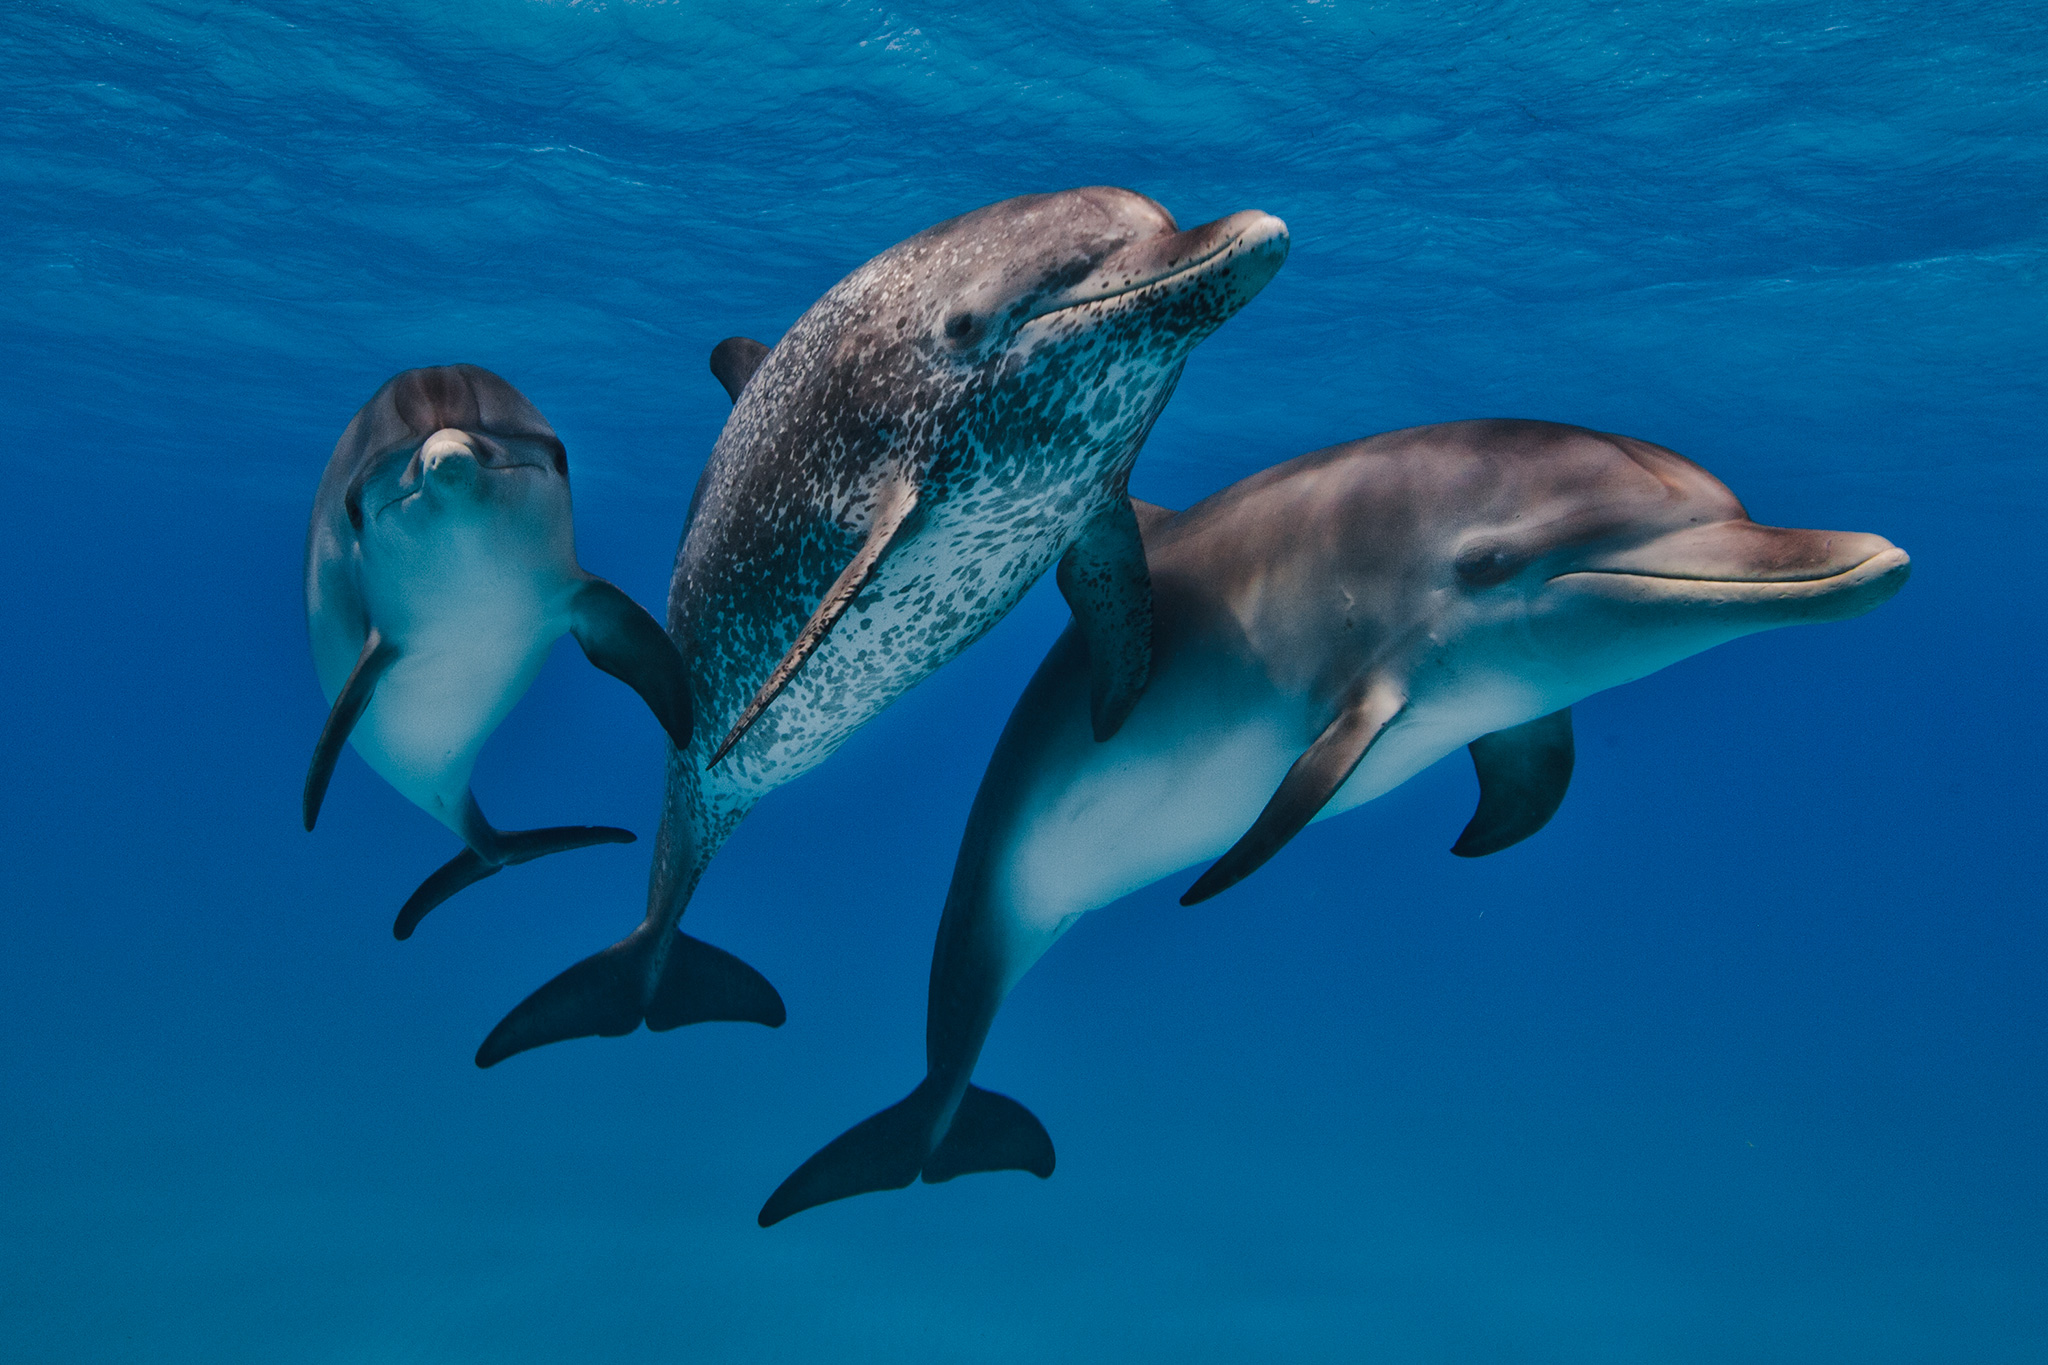 Atlantic spotted dolphins in the Bahamas